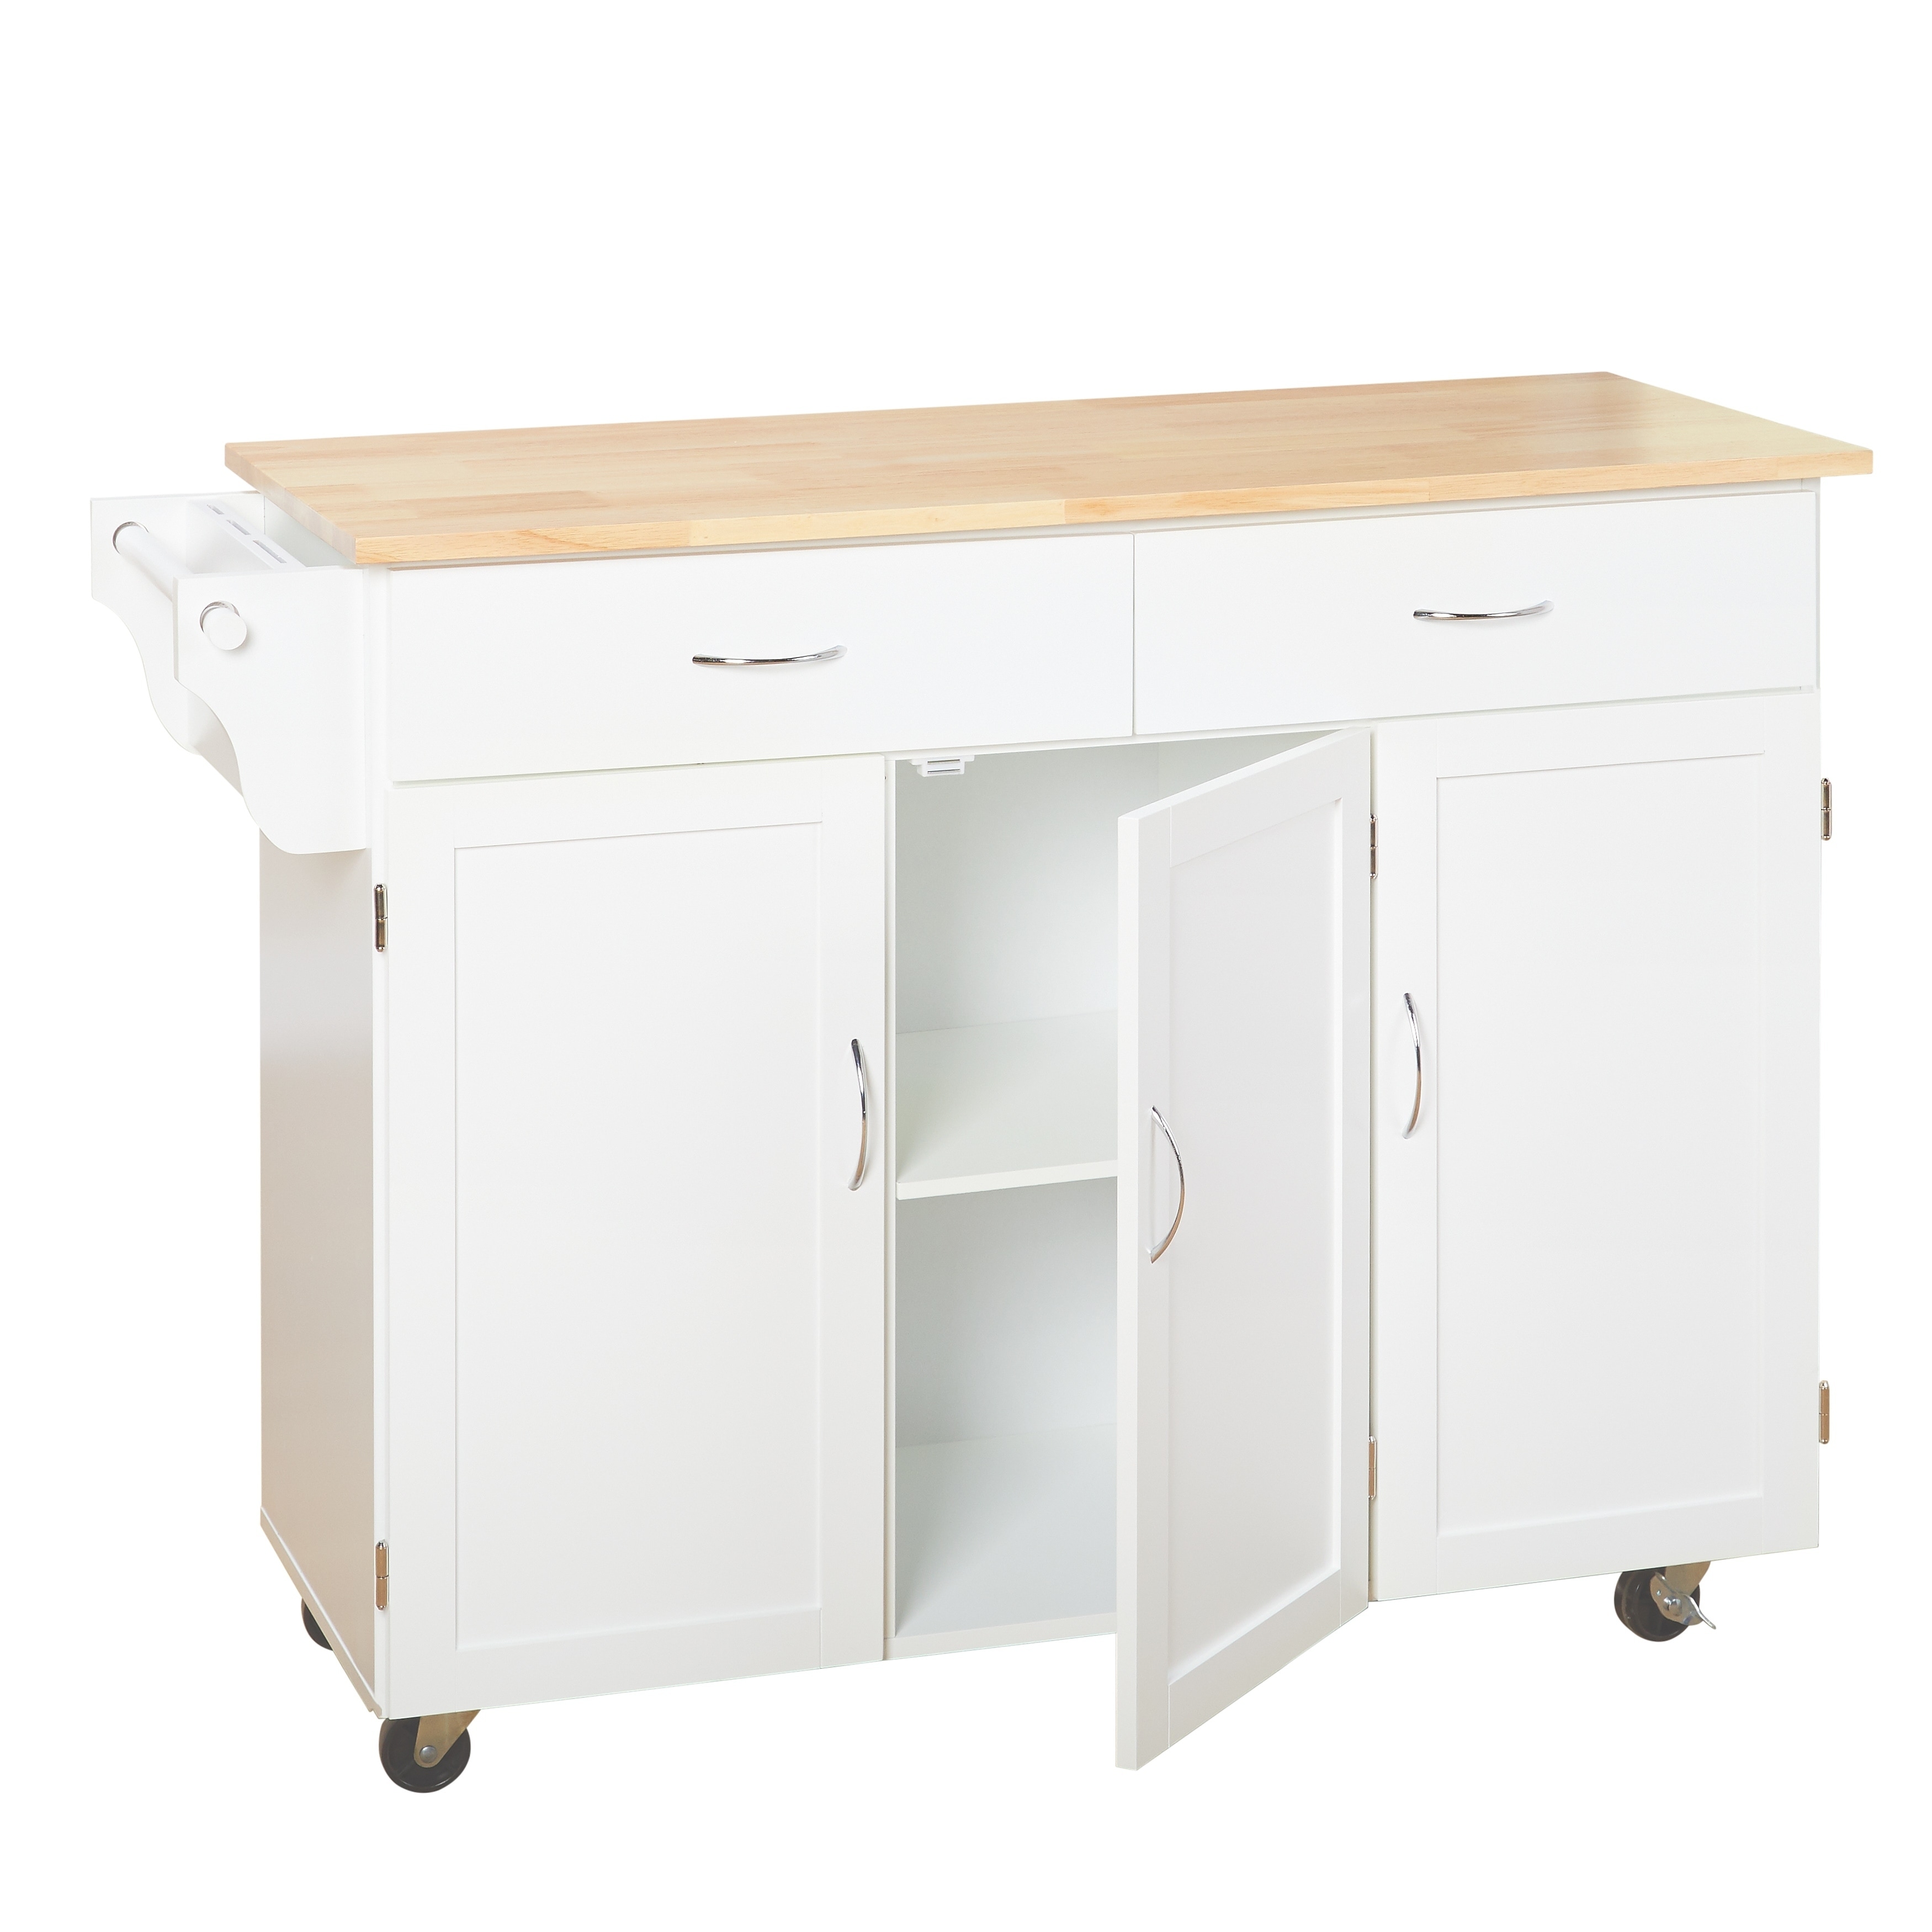 https://ak1.ostkcdn.com/images/products/28995024/Simple-Living-Addie-Kitchen-Cart-with-Wood-Top-7a2cb0c5-8c0c-4e53-aef1-3abc736de96d.jpg